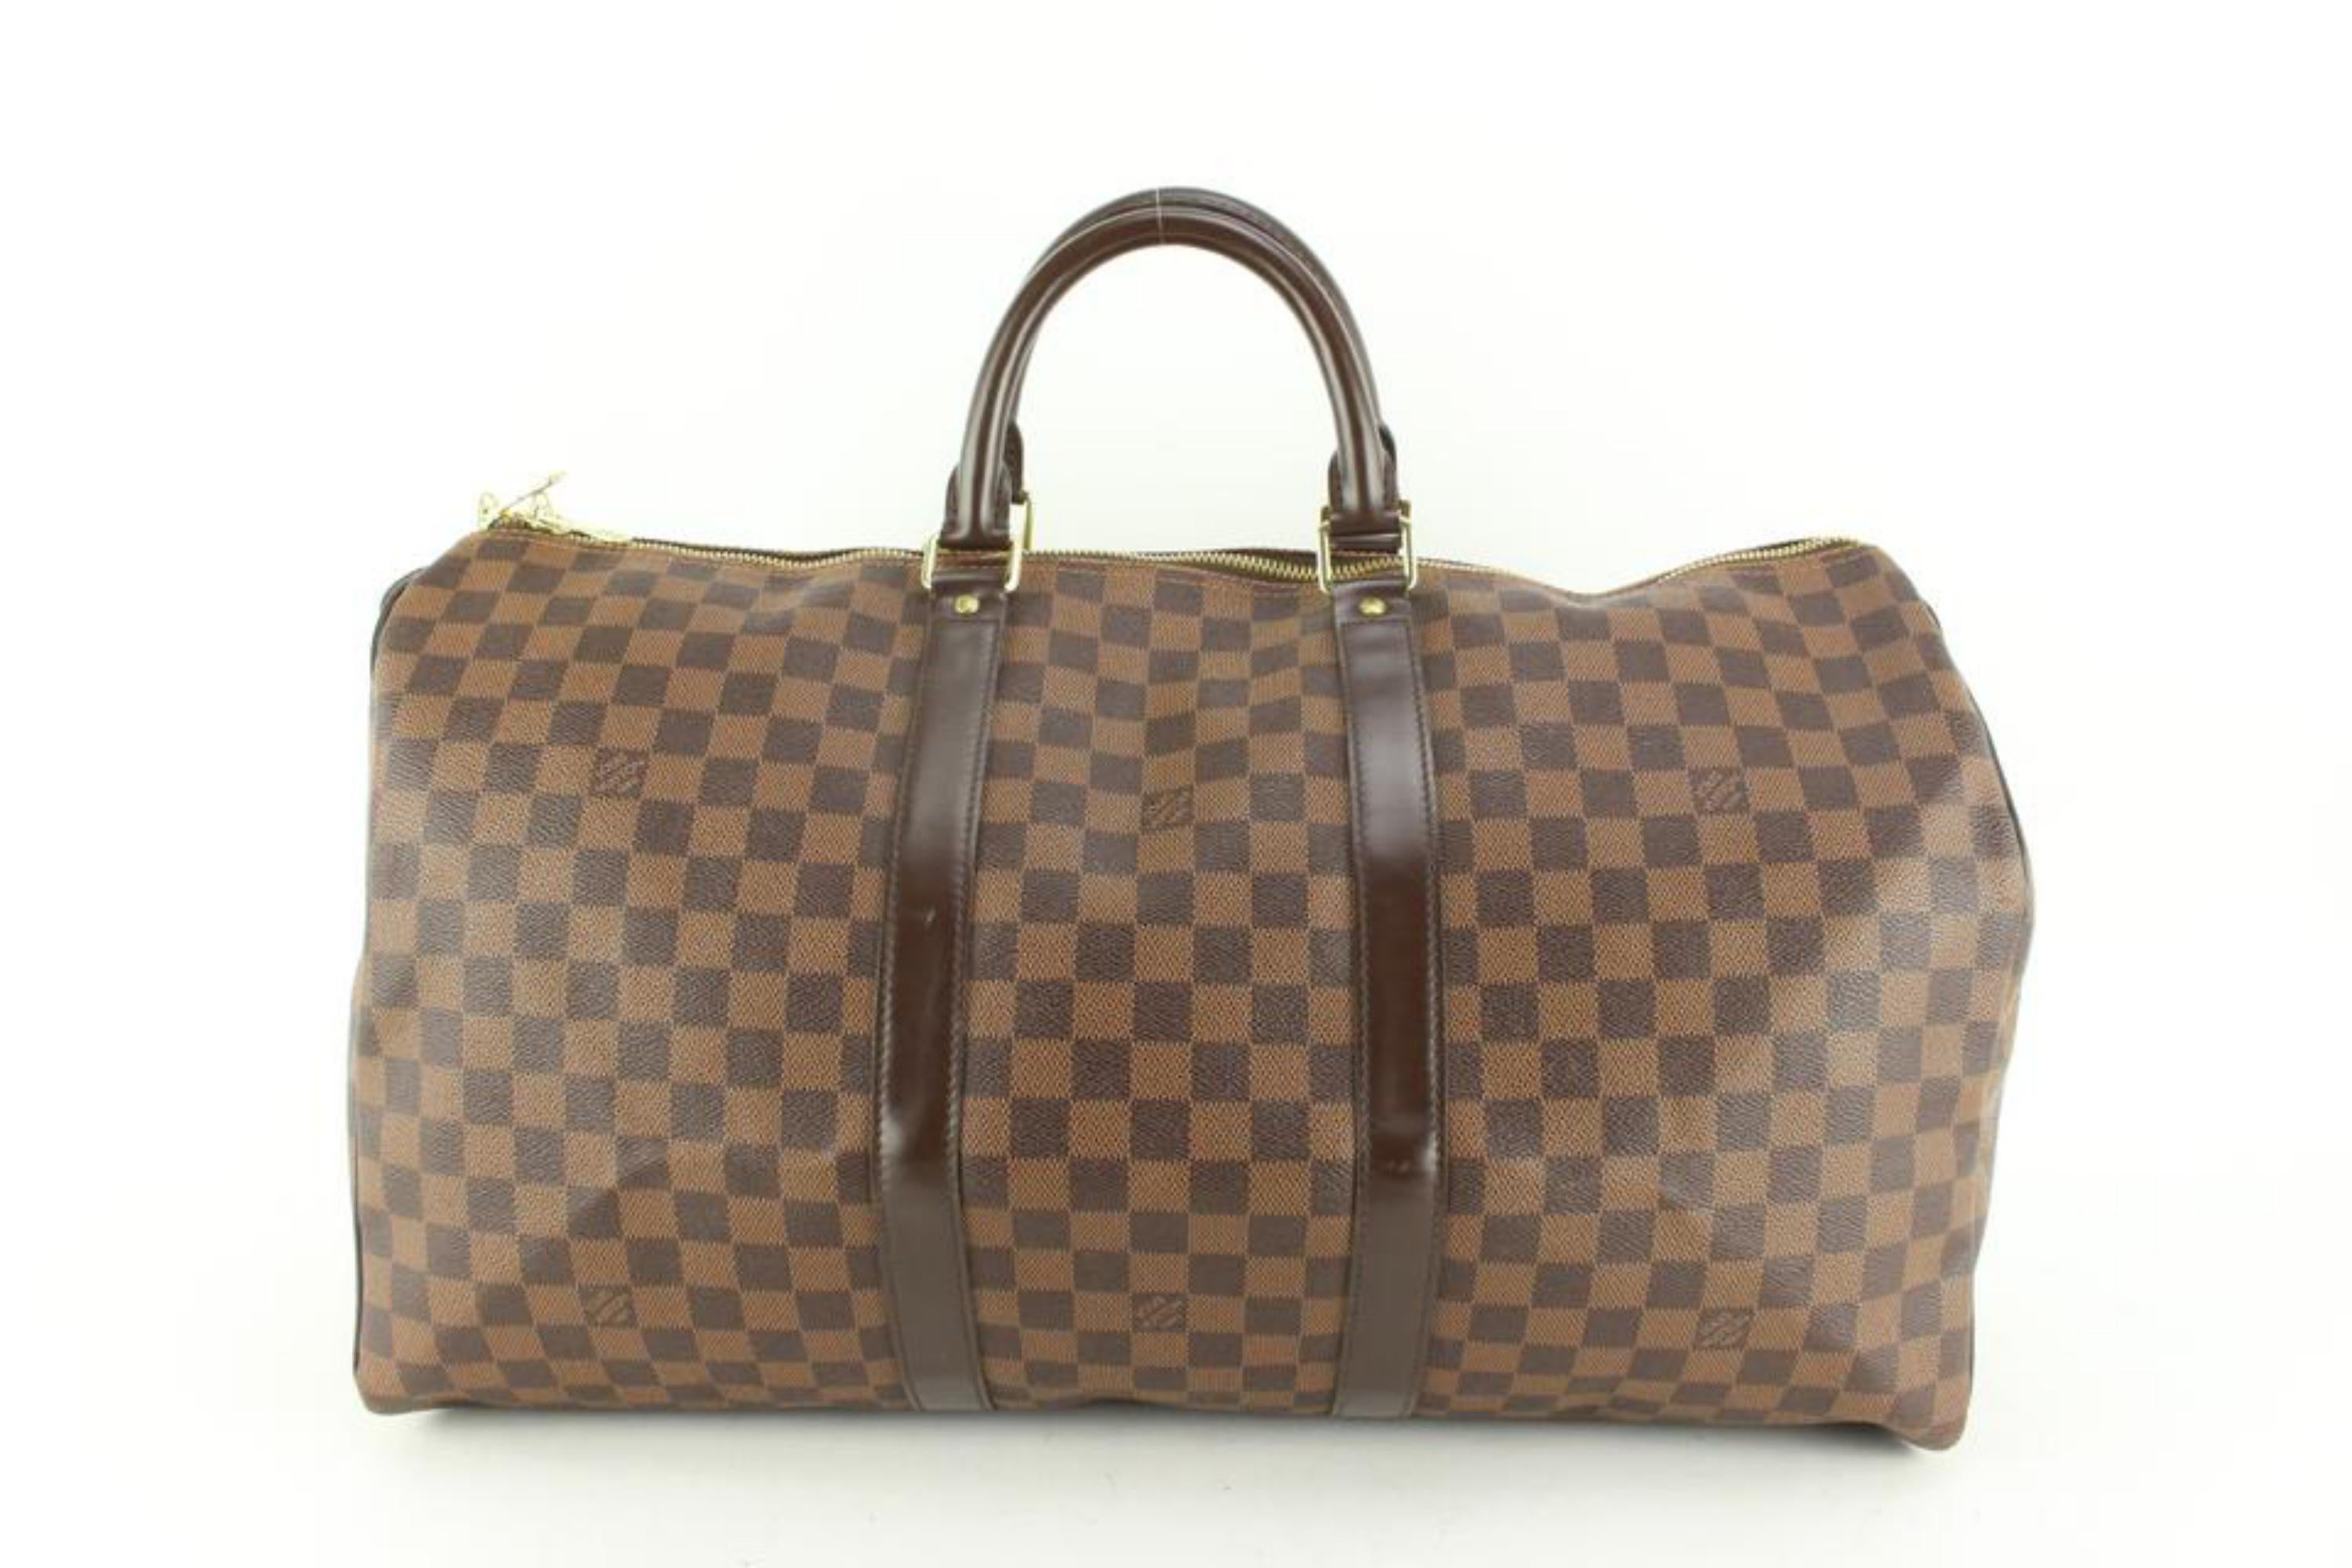 Women's Louis Vuitton Damier Ebene Keepall 50 Duffle Bag Upcycle Ready 54lz429s For Sale